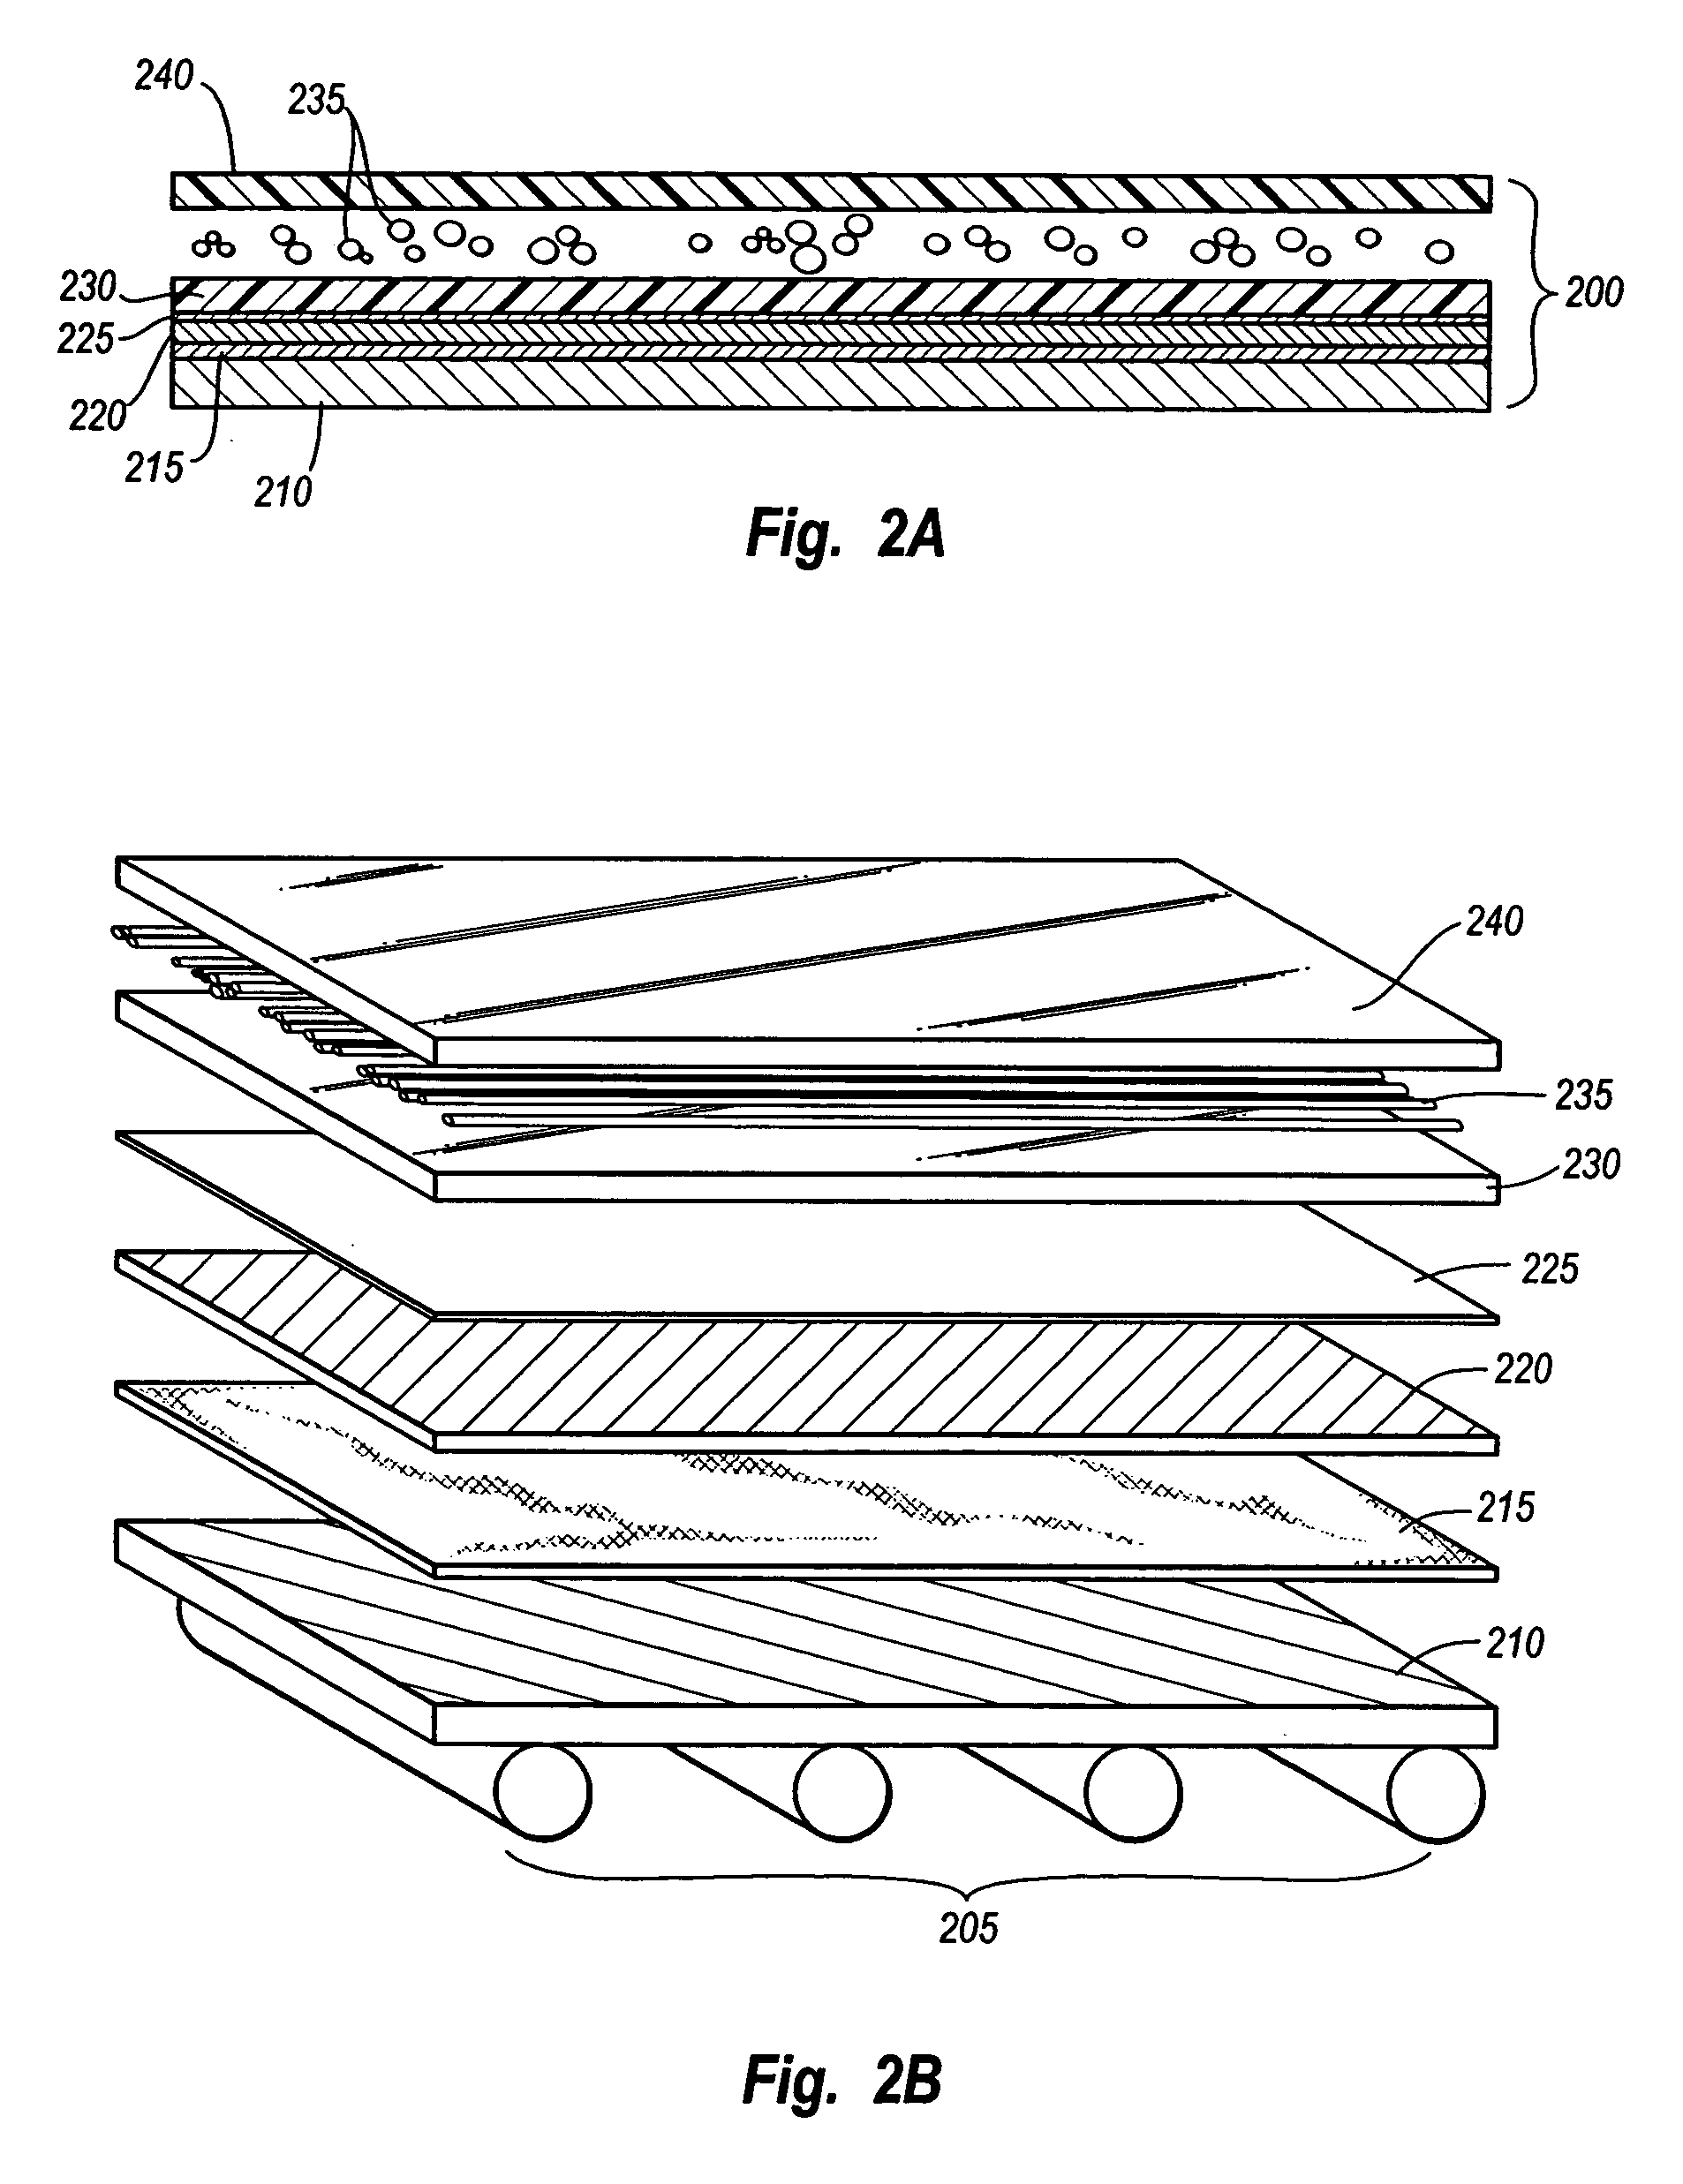 Architectural laminate panel with embedded compressible objects and methods for making the same